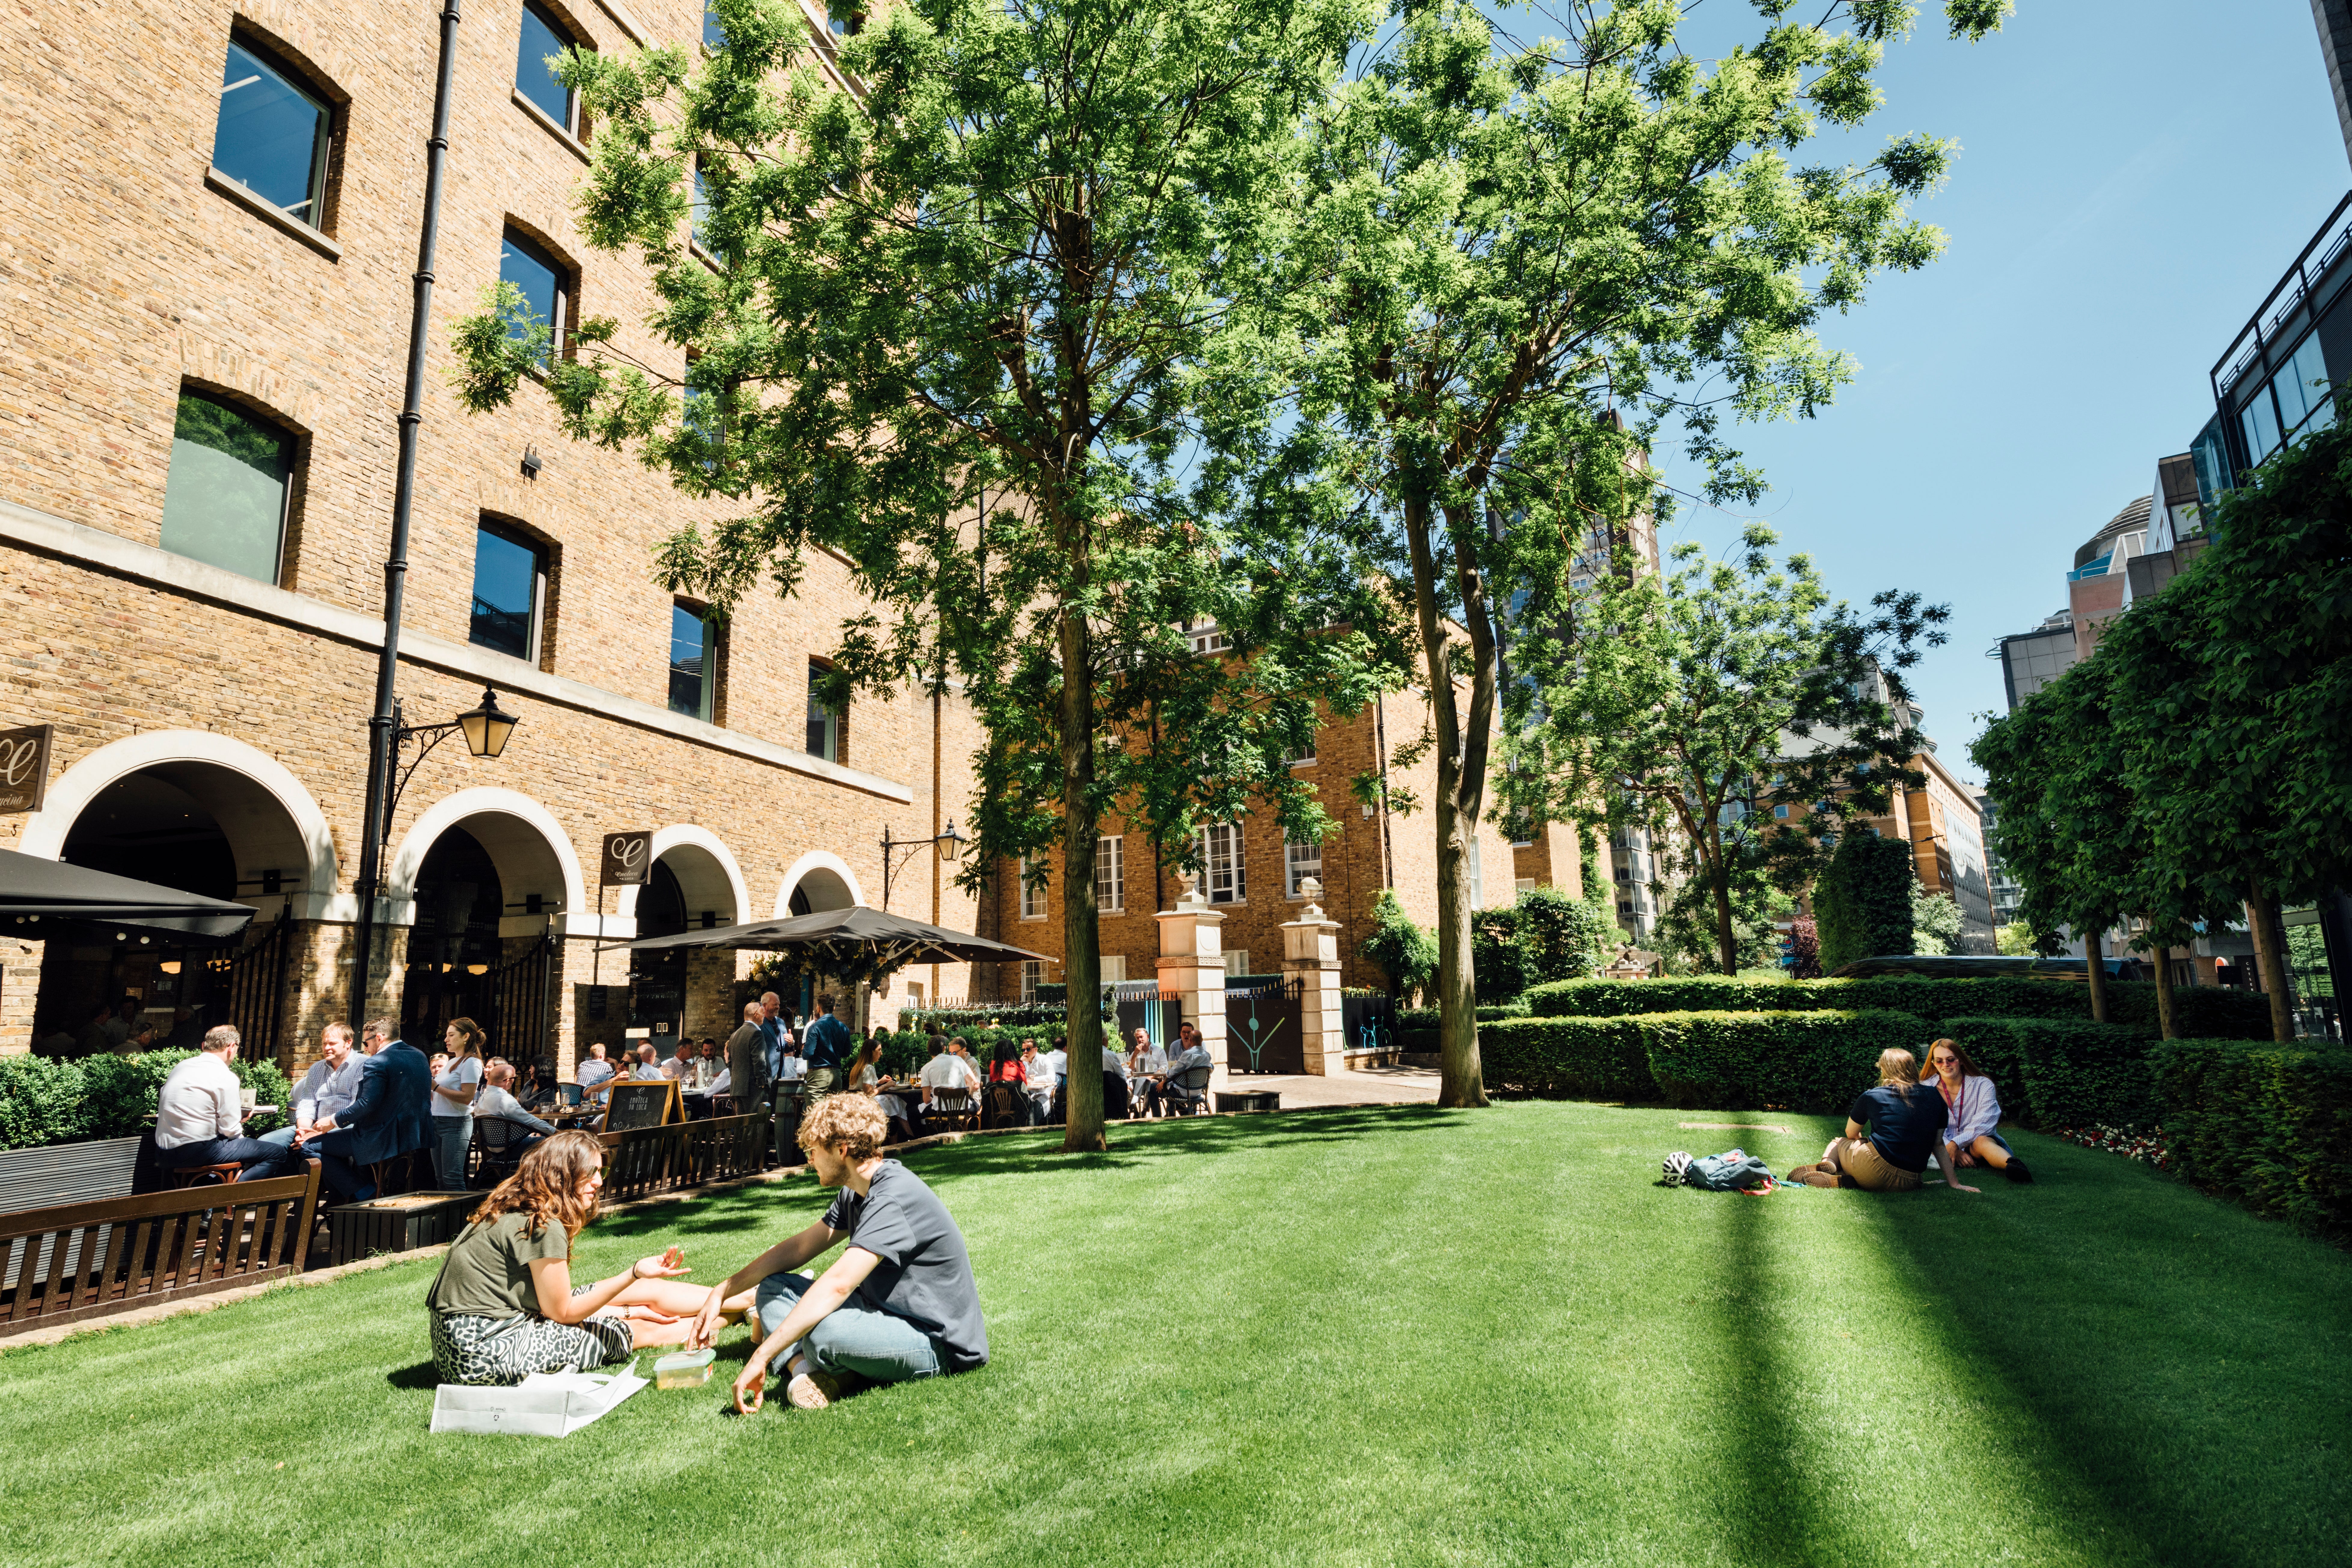 Nuveen’s Big Screen pops up at Devonshire Square from 1 July